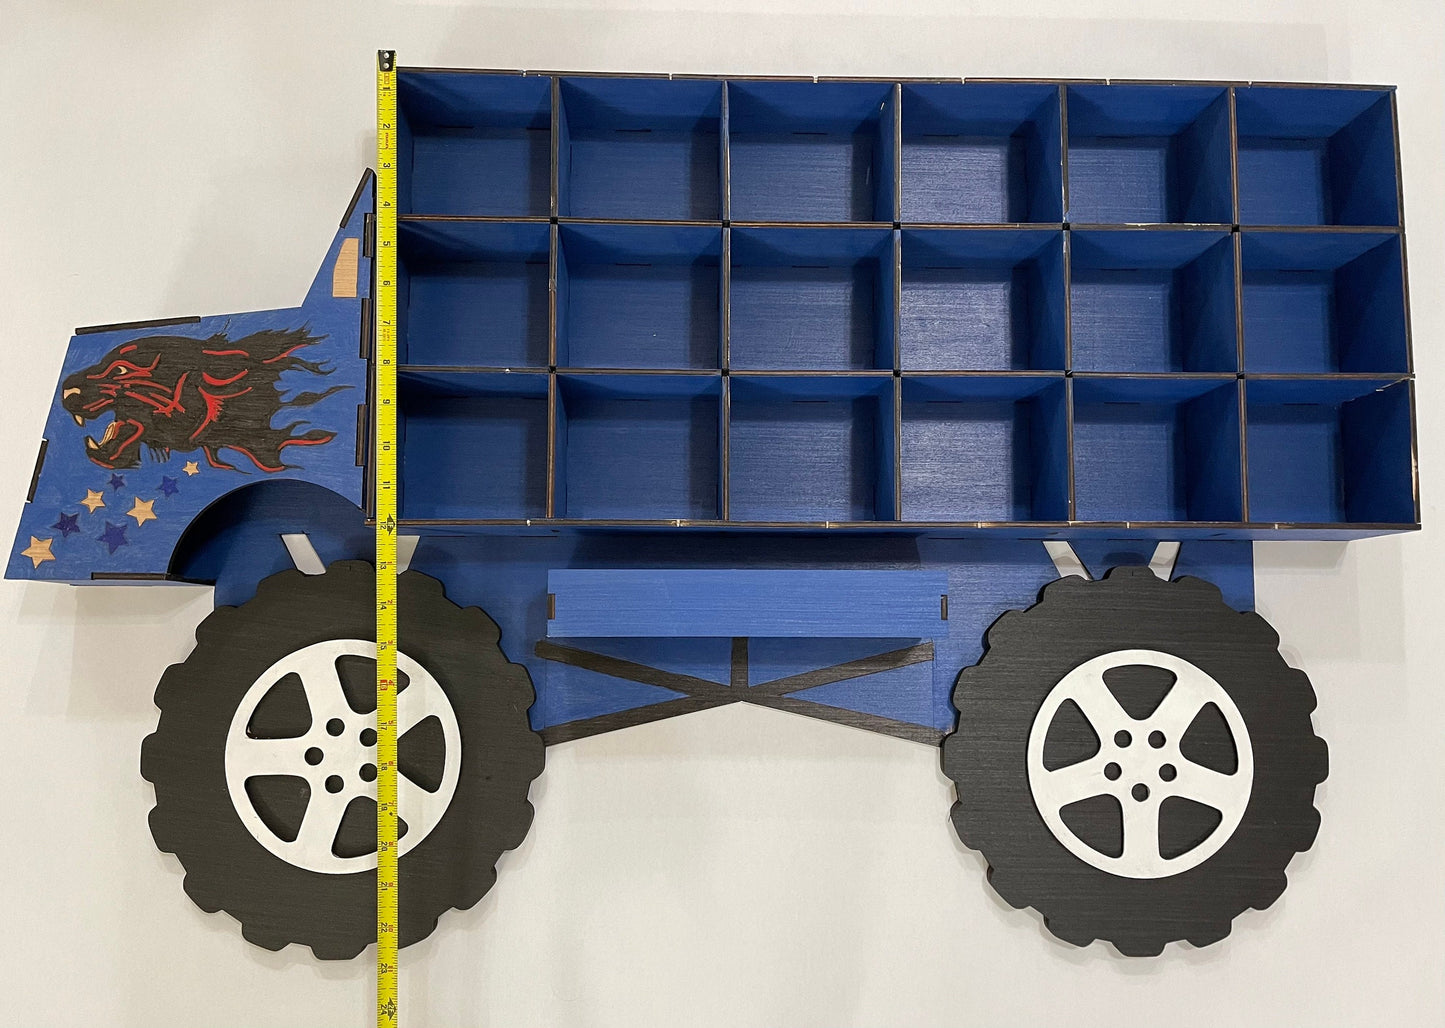 Monster wooden truck for small car storage with personalized name